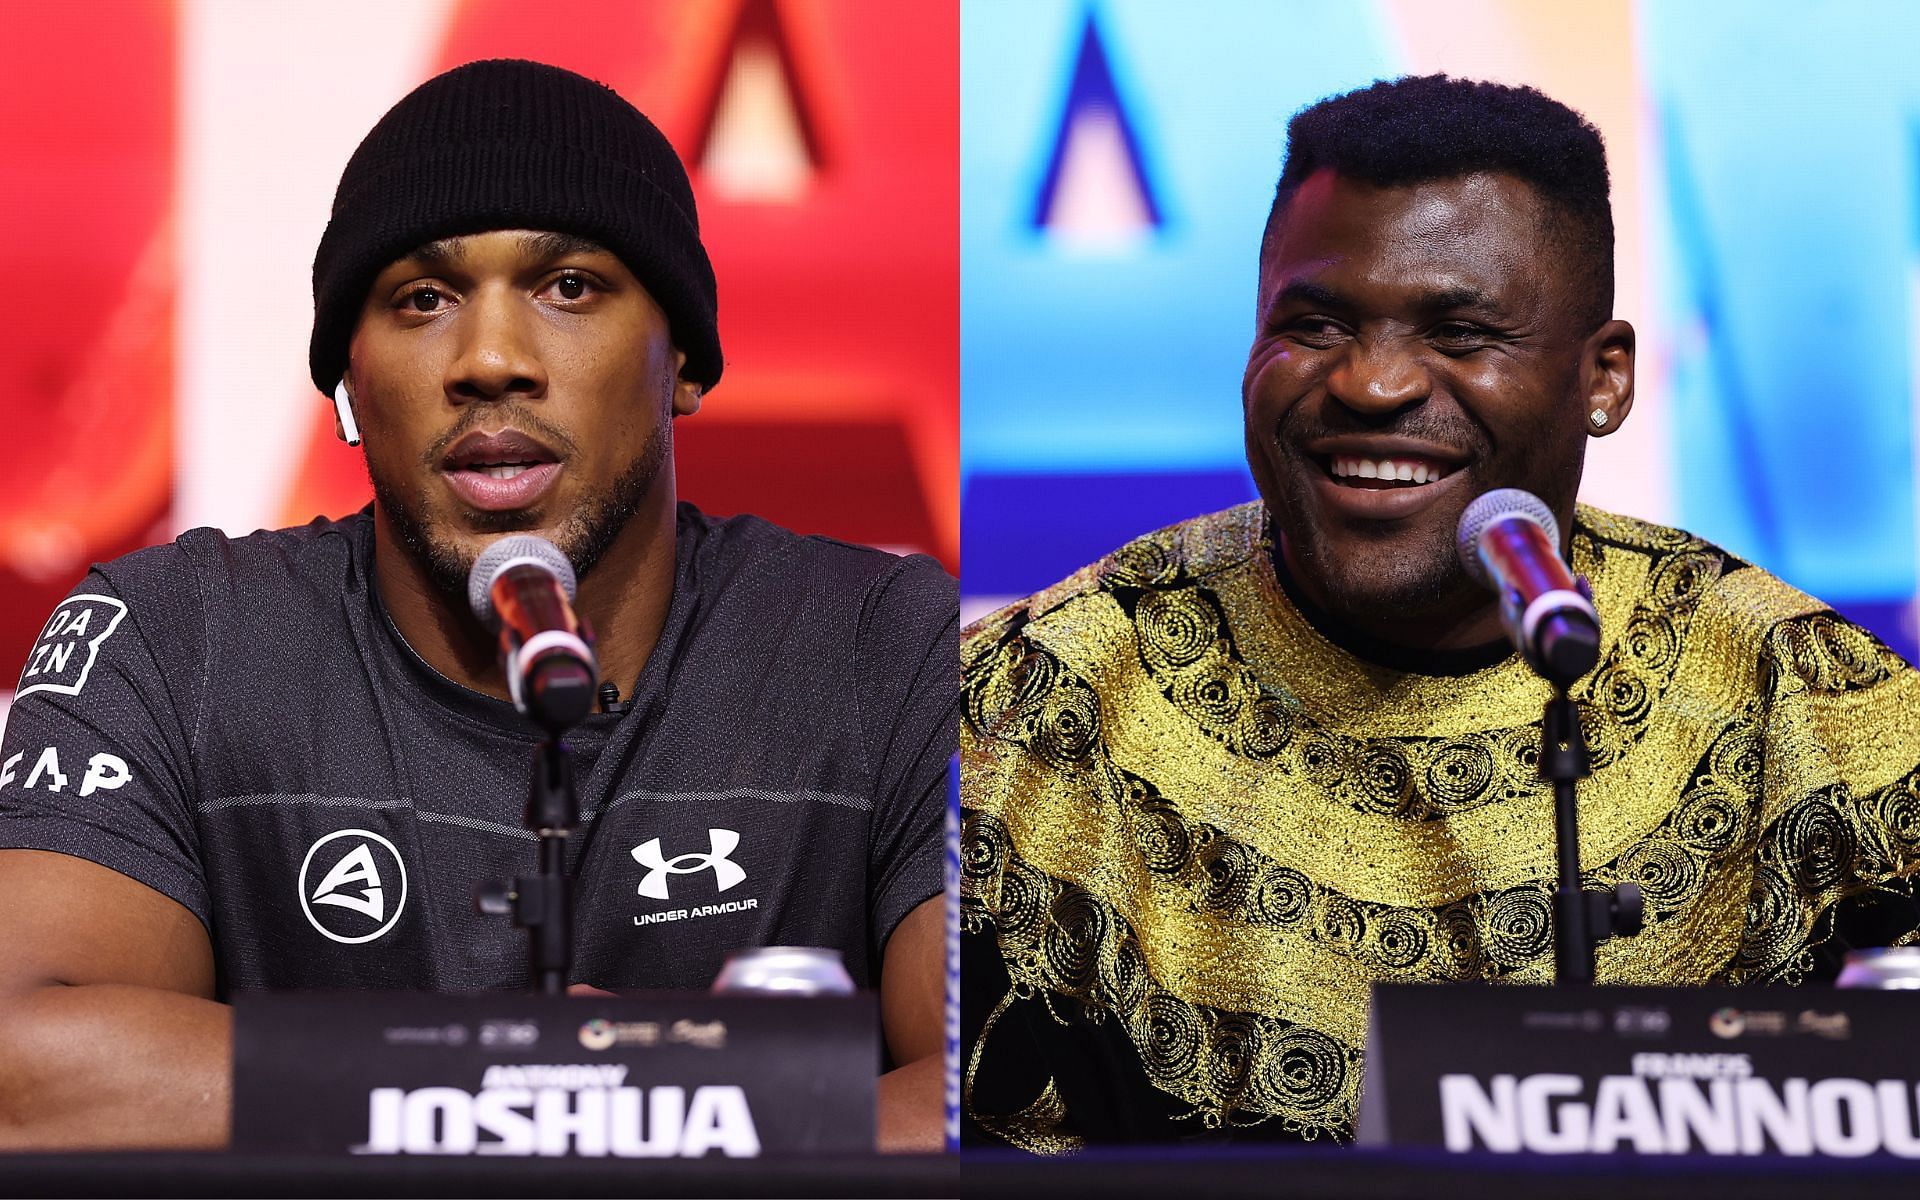 Anthony Joshua (left) is primed to face Francis Ngannou (right) in a pivotal heavyweight clash [Images courtesy: Getty Images]